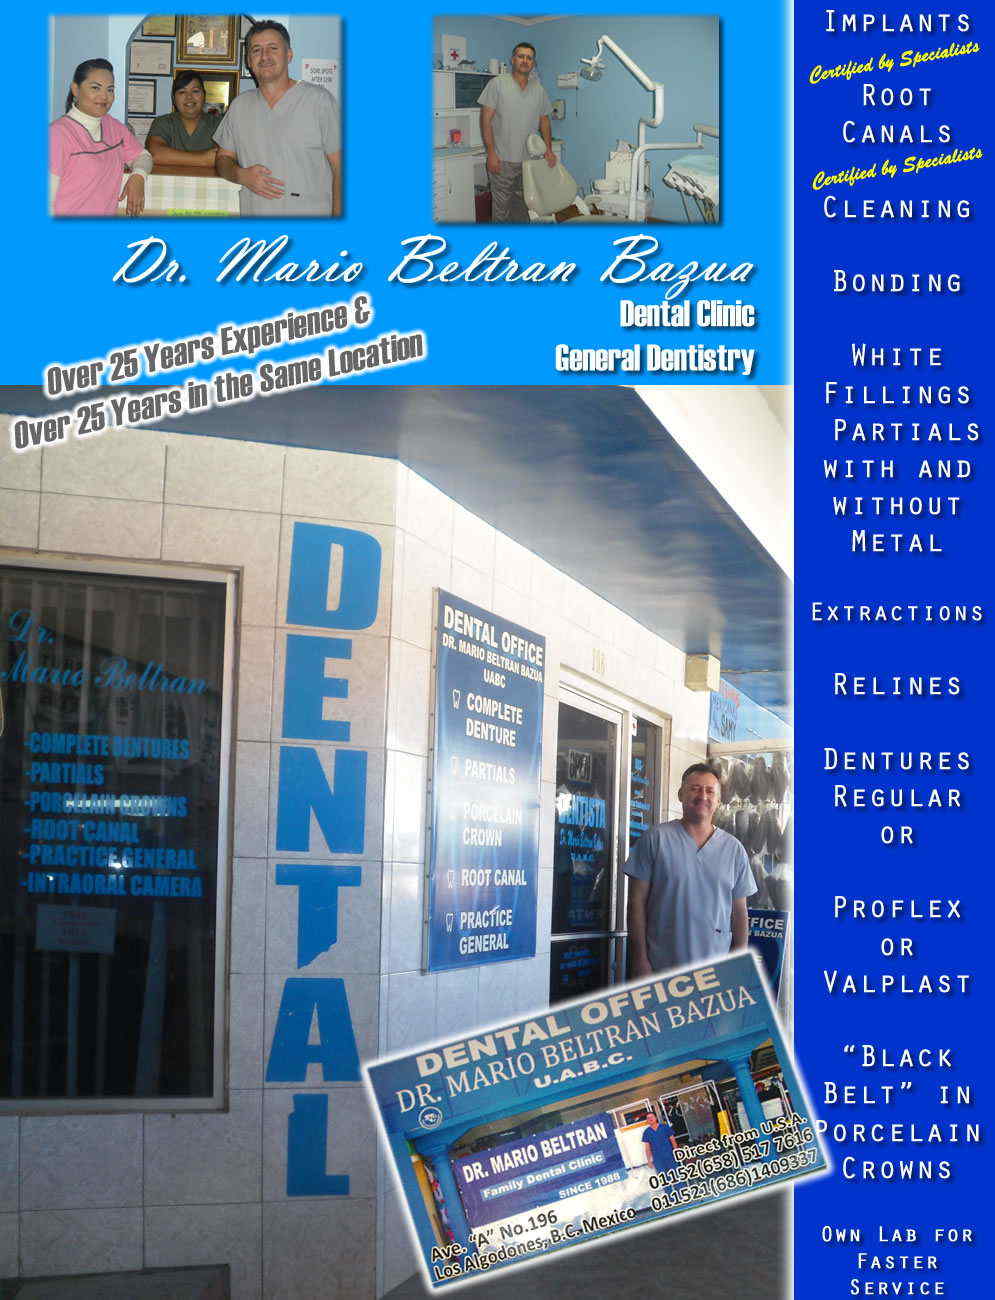 Dr. Mario Beltran Bazua in Algodones  in Algodones  Dntal OFFICE         Implants ~ Root Canals ~ Cleaning ~ Bonding 

 White Fillings ~ Partials with and without Metal  Extractions ~ Relines ~ Dentures ~ Regular or 

Proflex or Valplast

"Black Belt" in Porcelain Crowns

Own Lab for Faster Service

All Work Guaranteed        